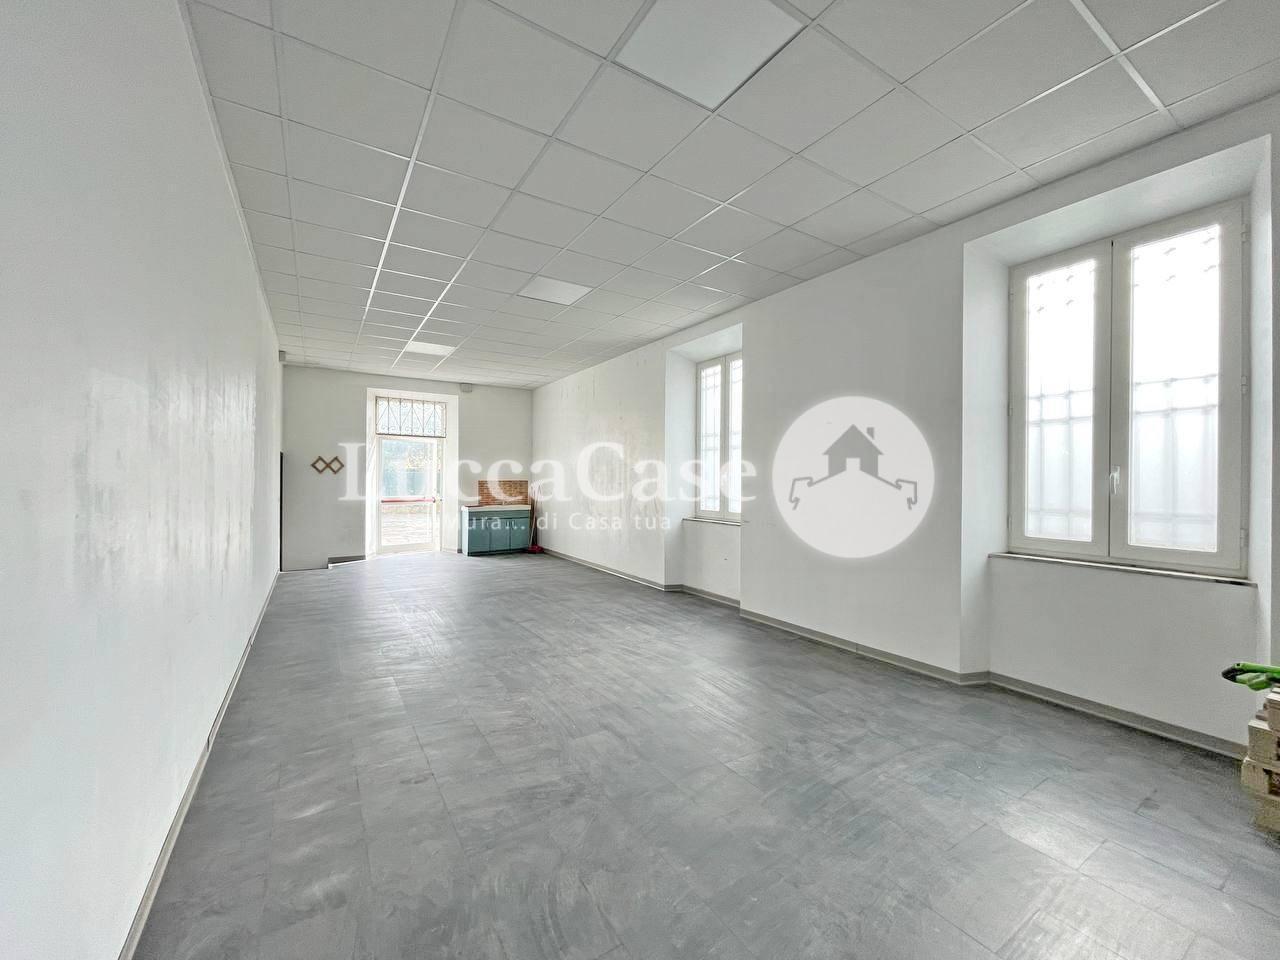 Store for commercial rentals, ref. EF090P